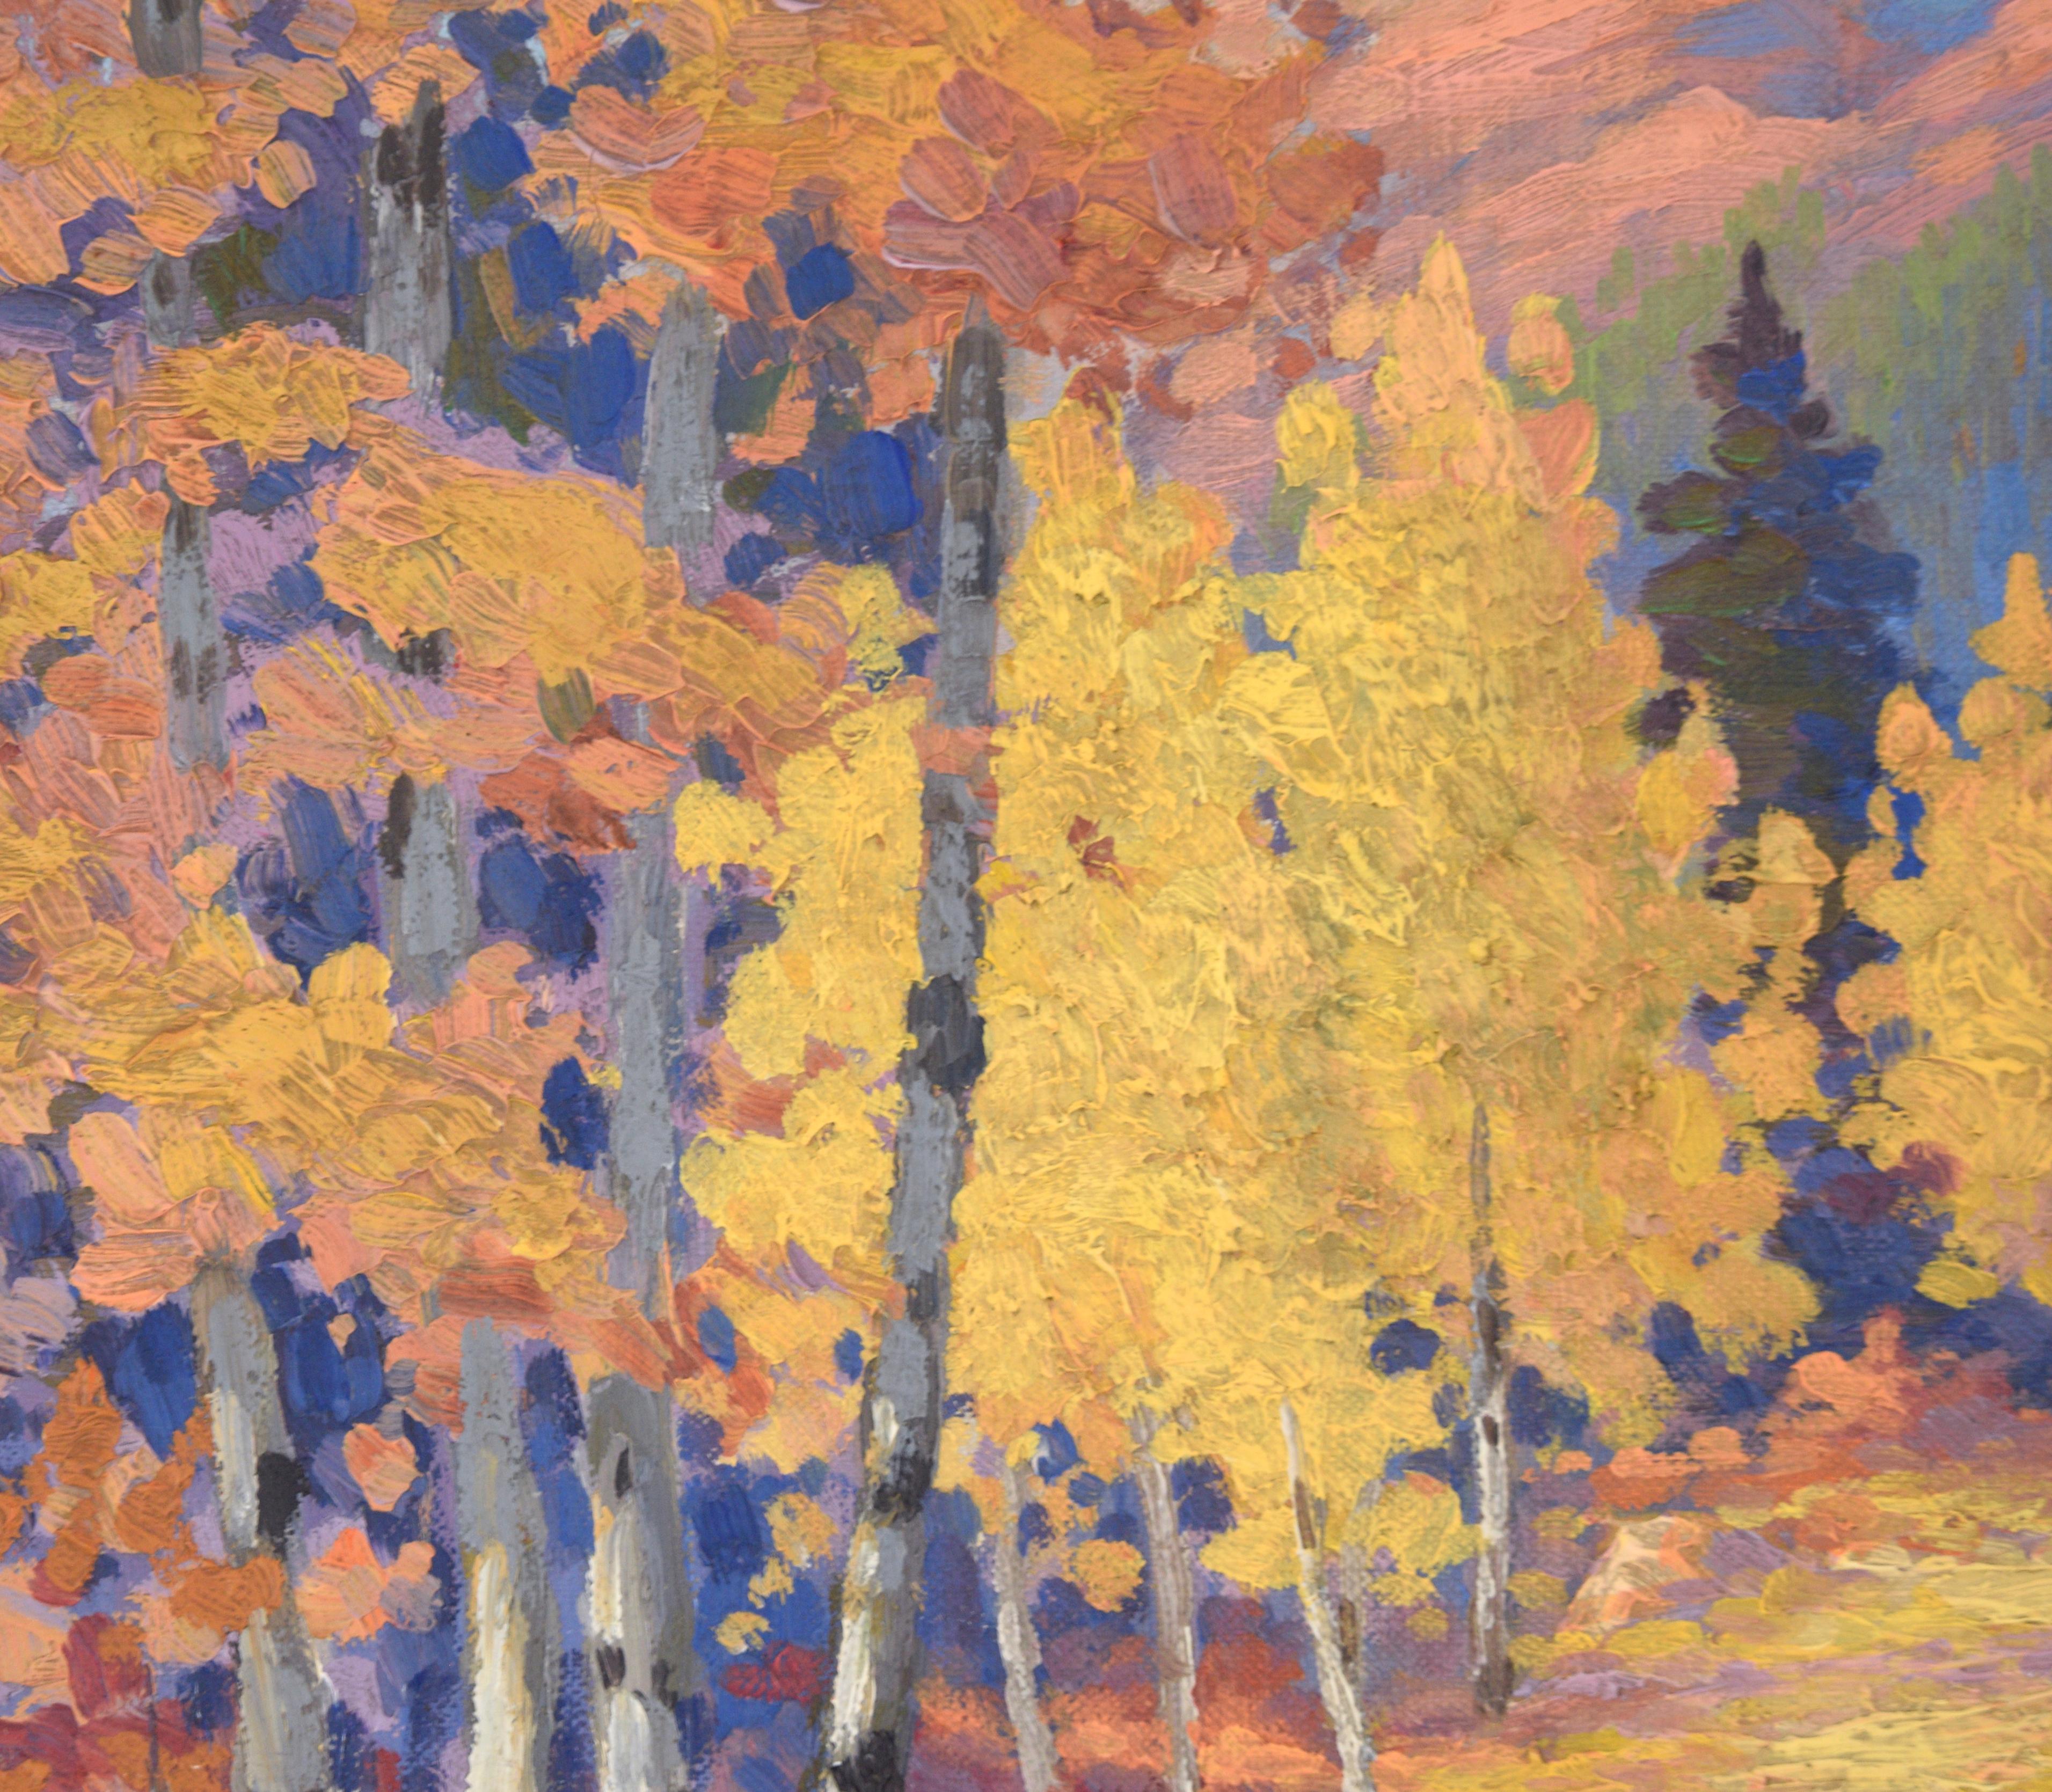 Fallen Leaves on the Path at Estes Park, Colorado - Autumn Landscape 1940 - American Impressionist Painting by MC Brown